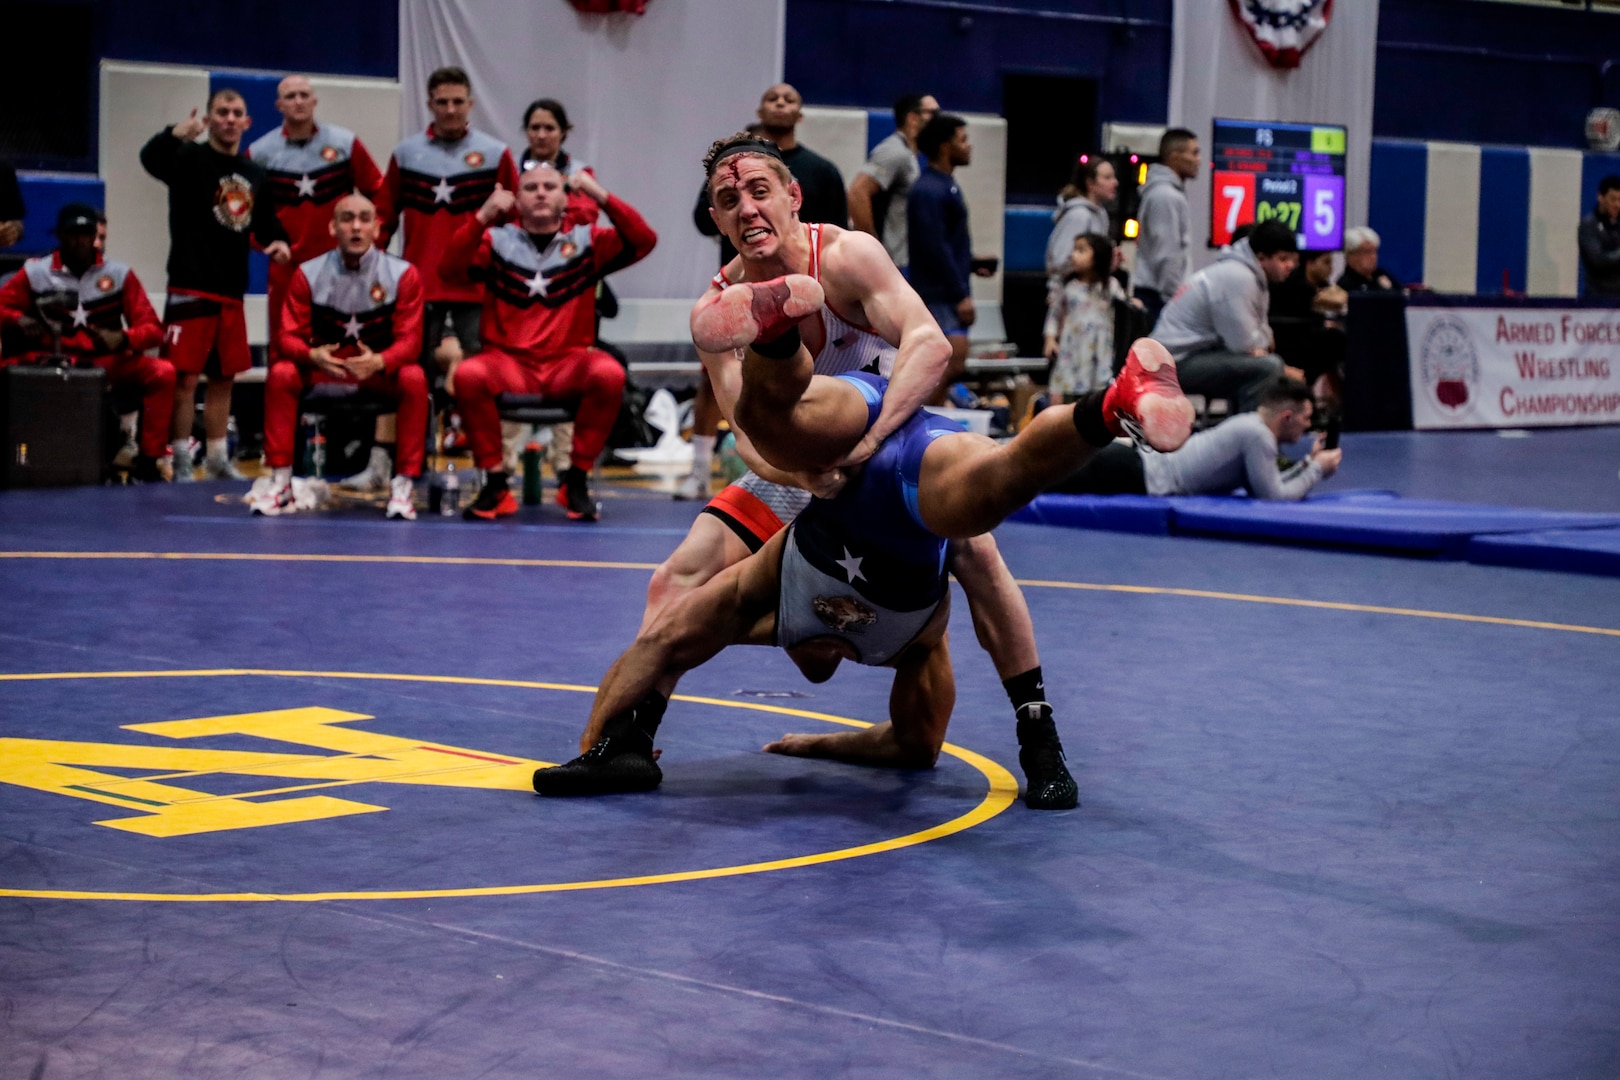 NAVAL BASE KITSAP, Wa. (Feb. 23, 2020) - 1LT Michael Hooker with the U.S. Army wrestling team competes against LCpl Ali Marciano with the U.S. Marine Corps wrestling team in the Freestyle event during the final round of the 2020 Armed Forces Sports Wrestling Championship at the Bremeton Fitness Complex. (U.S. Navy Photo by Mass Communication Specialist 1st Class Ian Carver/RELEASED).